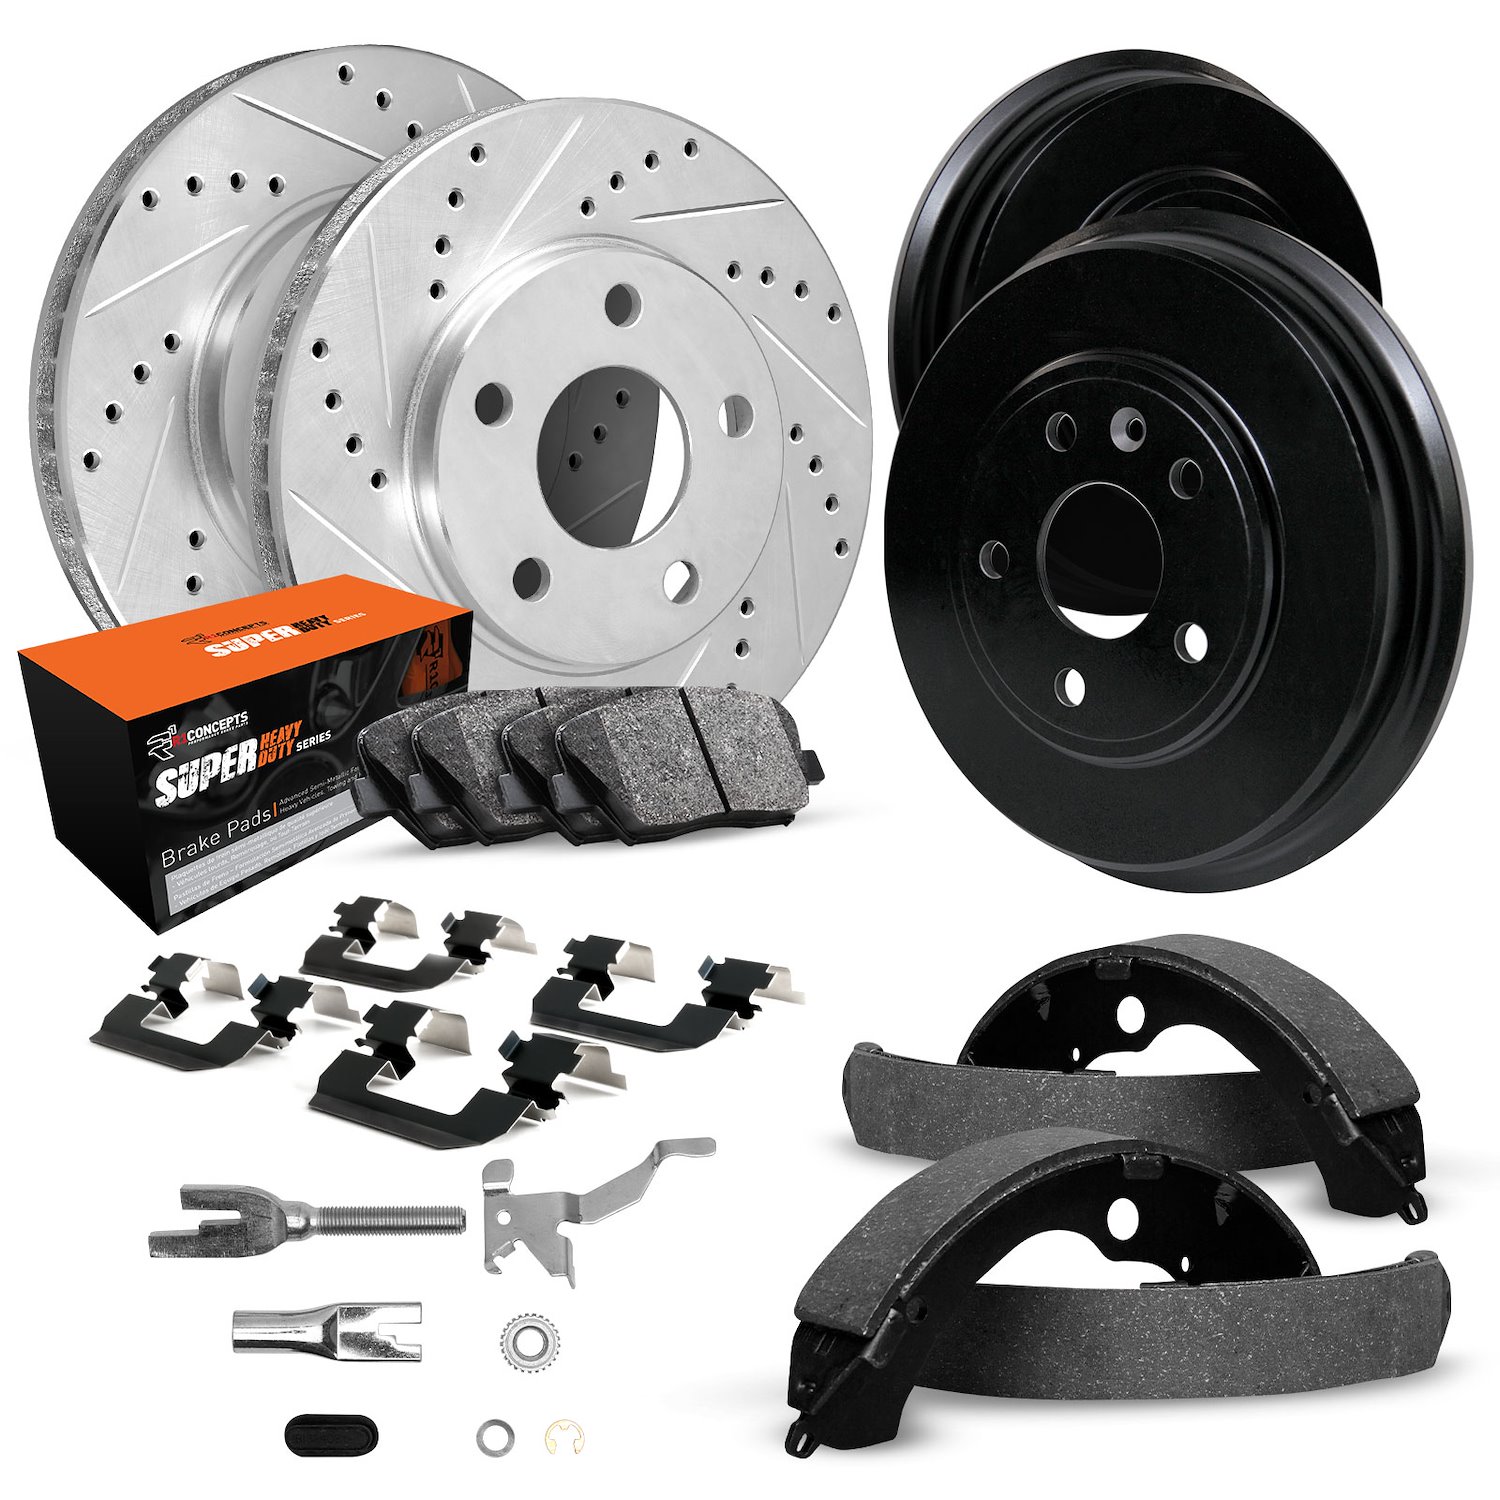 E-Line Drilled/Slotted Silver Rotor & Drum Set w/Super-Duty Pads, Shoes/Hardware/Adjusters, 1990-1994 Ford/Lincoln/Mercury/Mazda